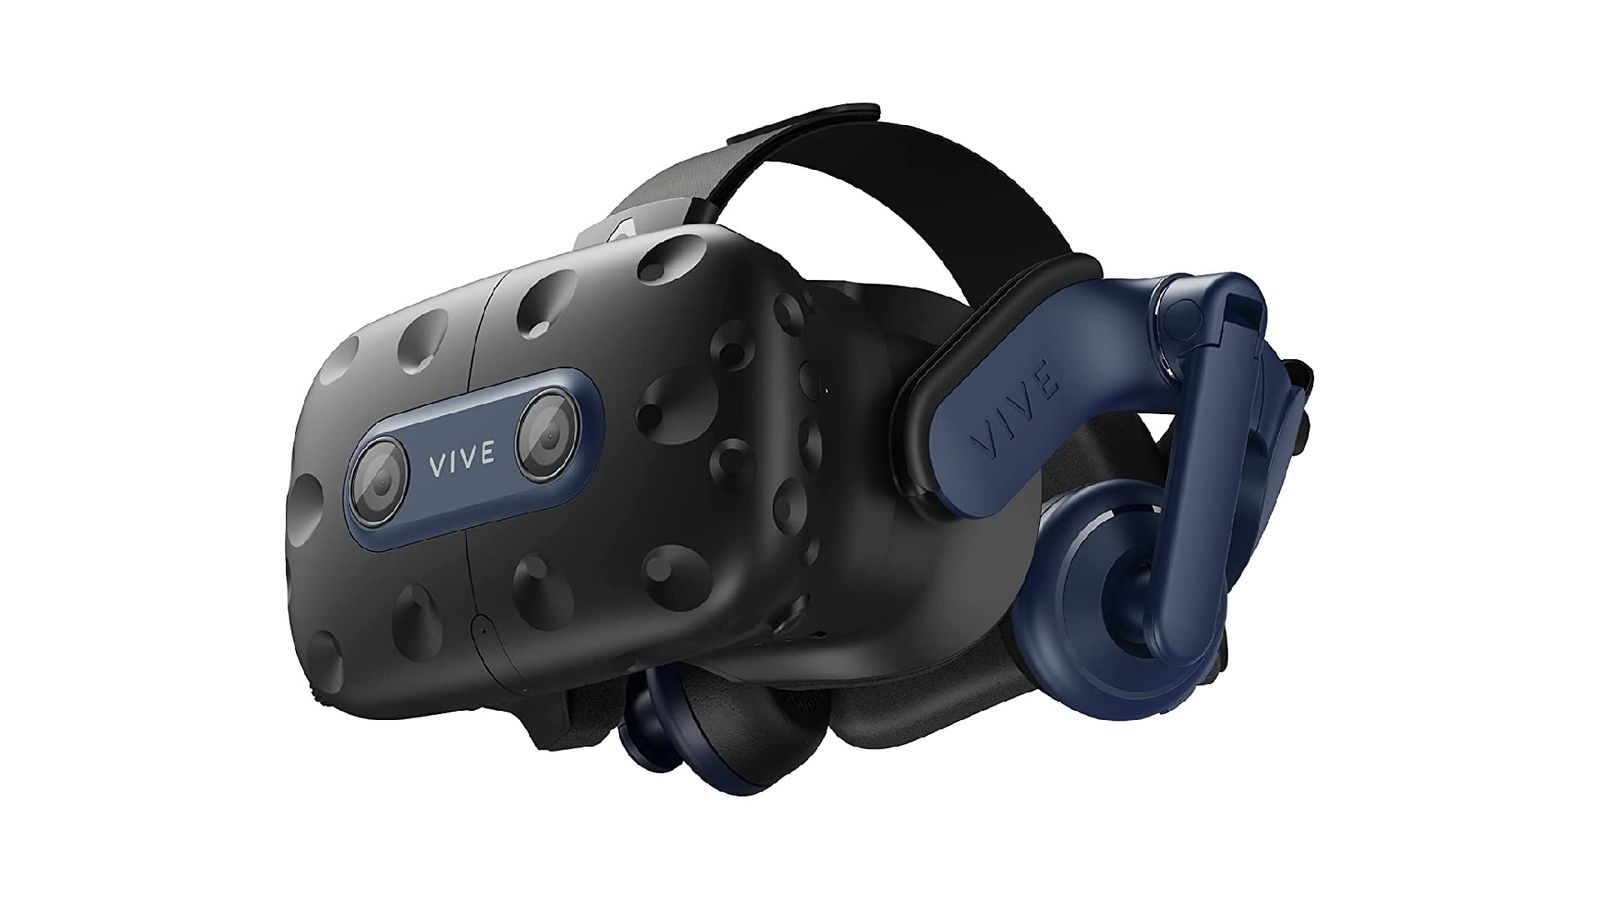 VIVE Pro 2 product image of a black and dark blue VR headset that goes over your head.